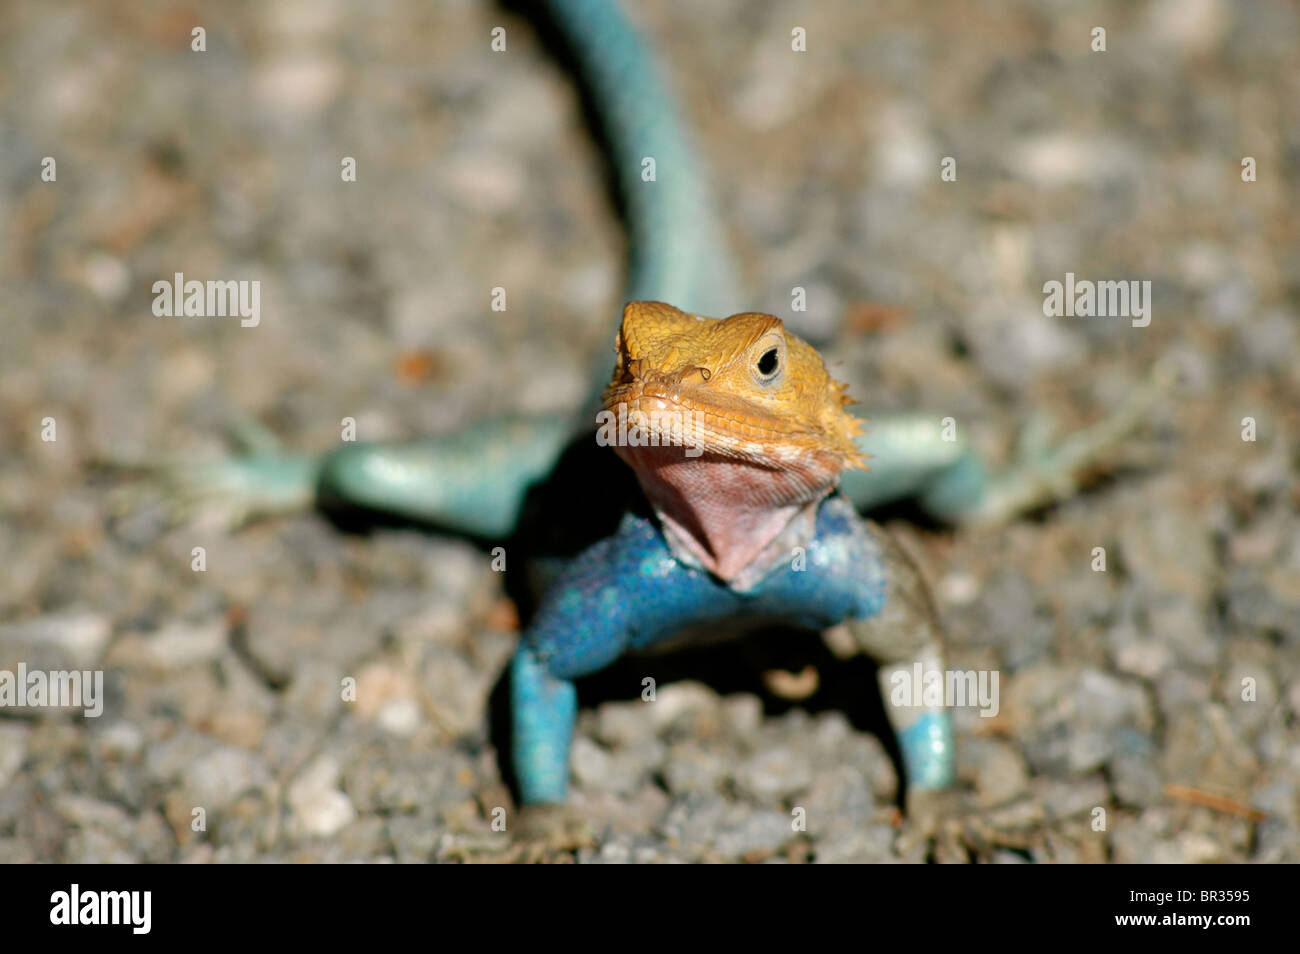 African lizard or gekko with orange, blue and green markings on pebbles Stock Photo